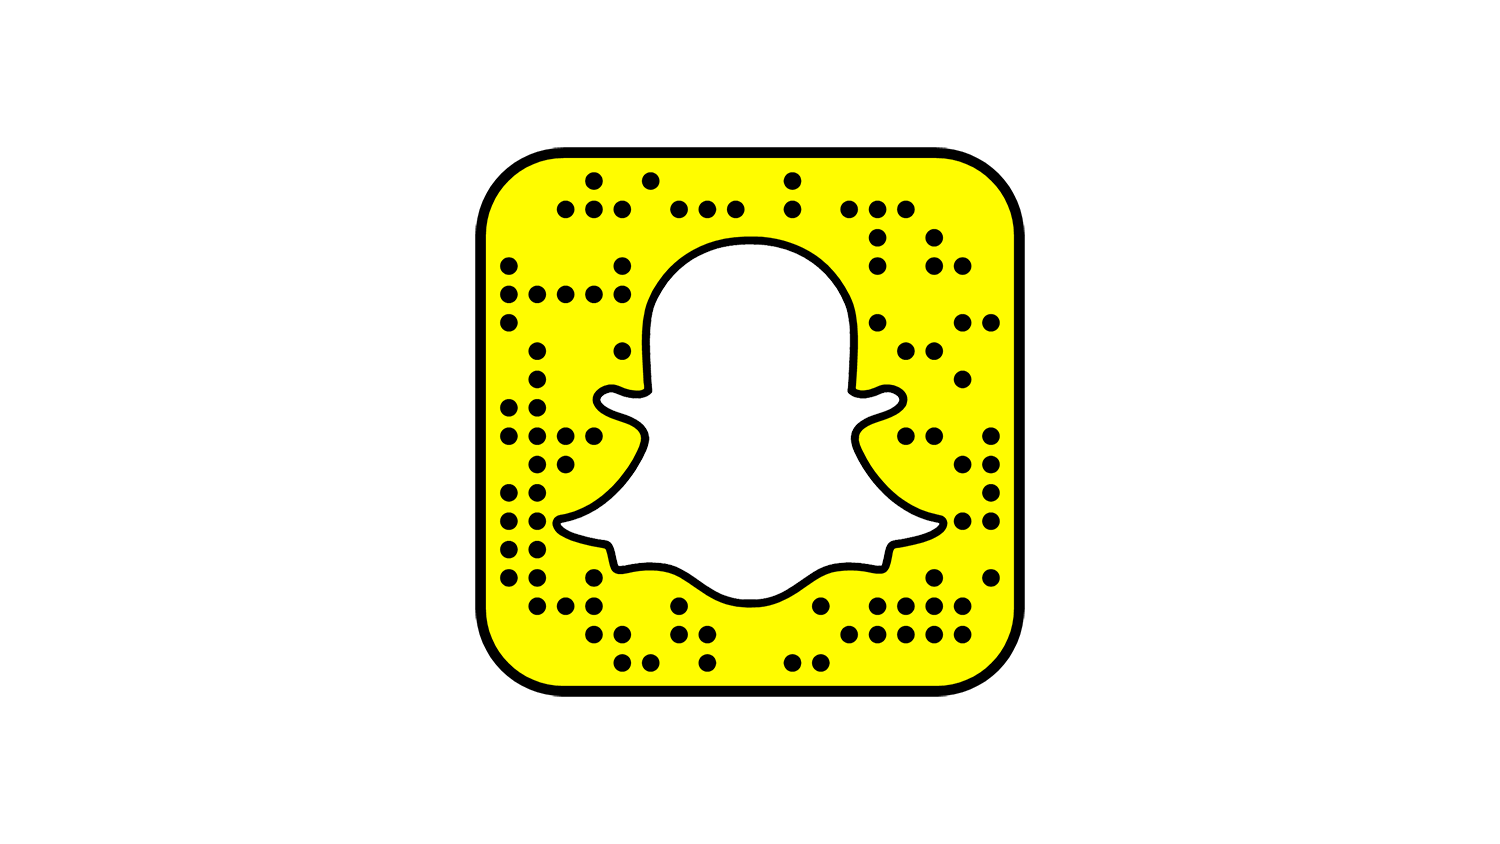 Scapchat Logo - Snapchat Logo Transparent PNG #46449 - Free Icons and PNG Backgrounds